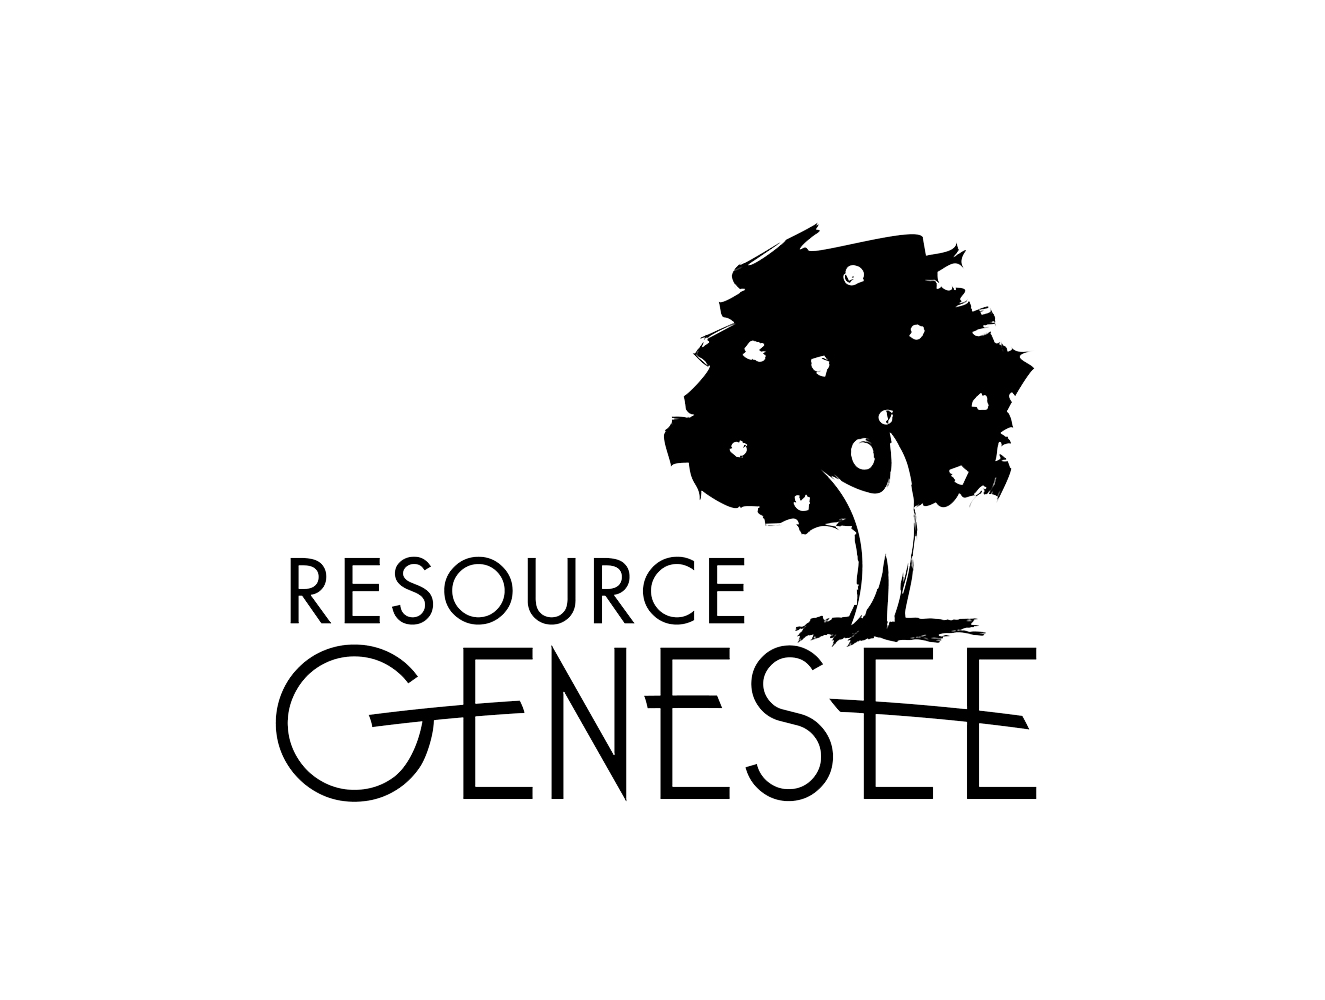 Resource Genesee logo, one color version